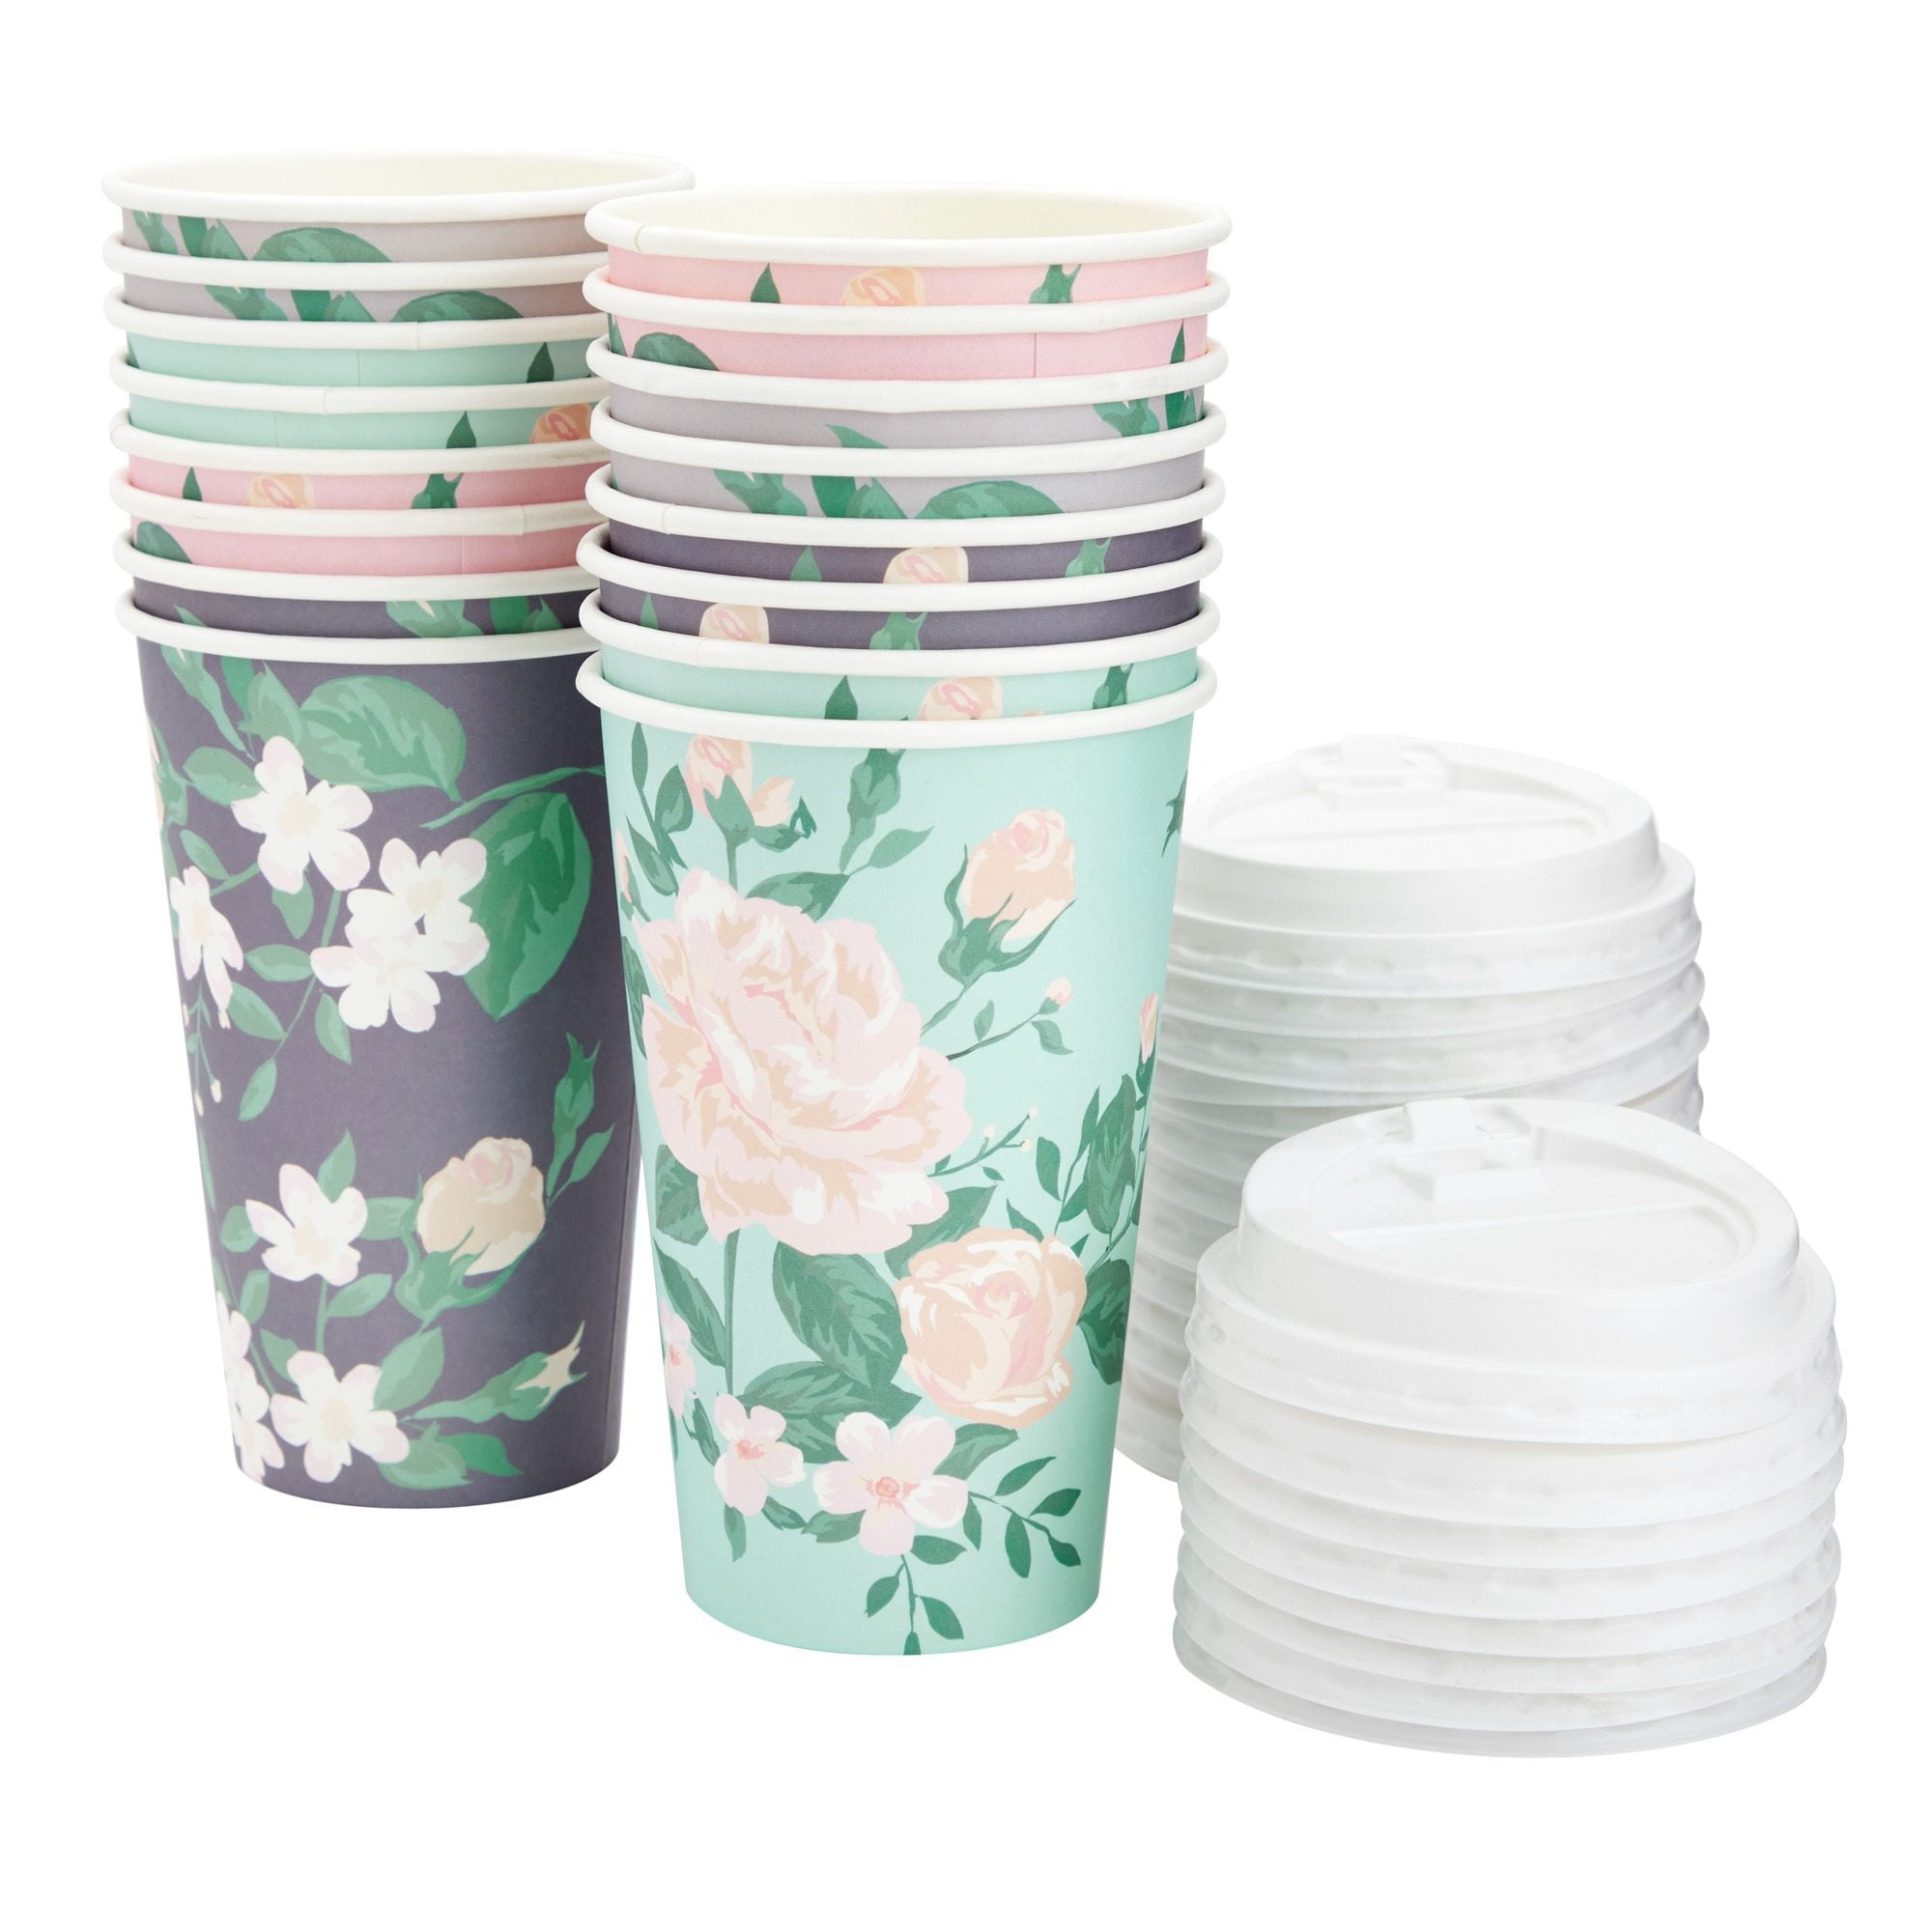 16 oz. Fall Harvest Design Disposable Paper Coffee Cups with Lids – 12 Ct.